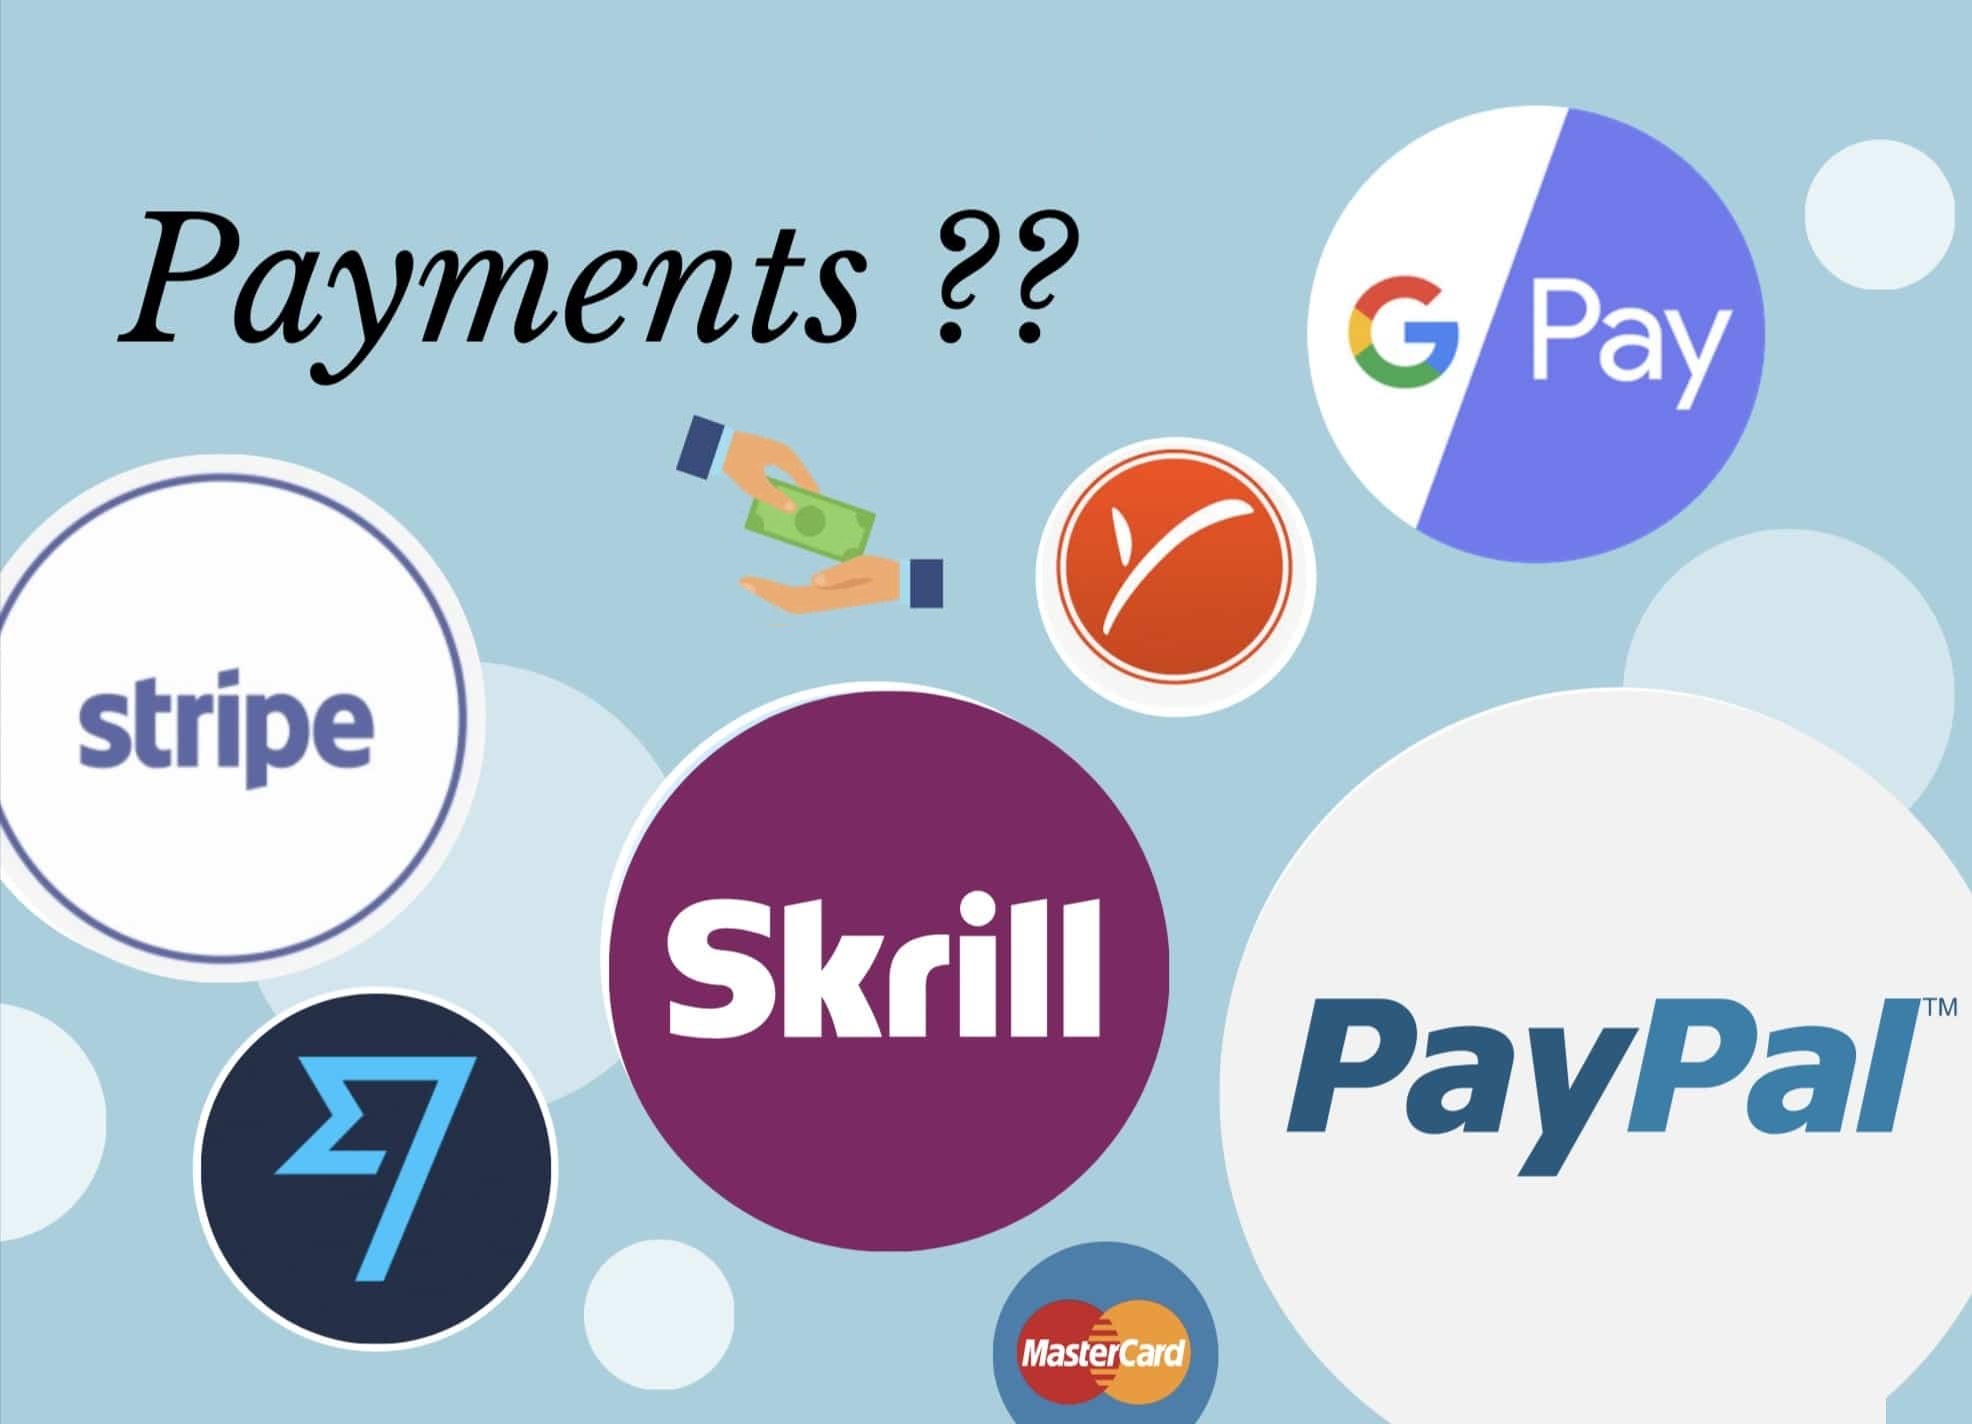 PayPal Alternative - What Are Other Websites to Make Online Payment?